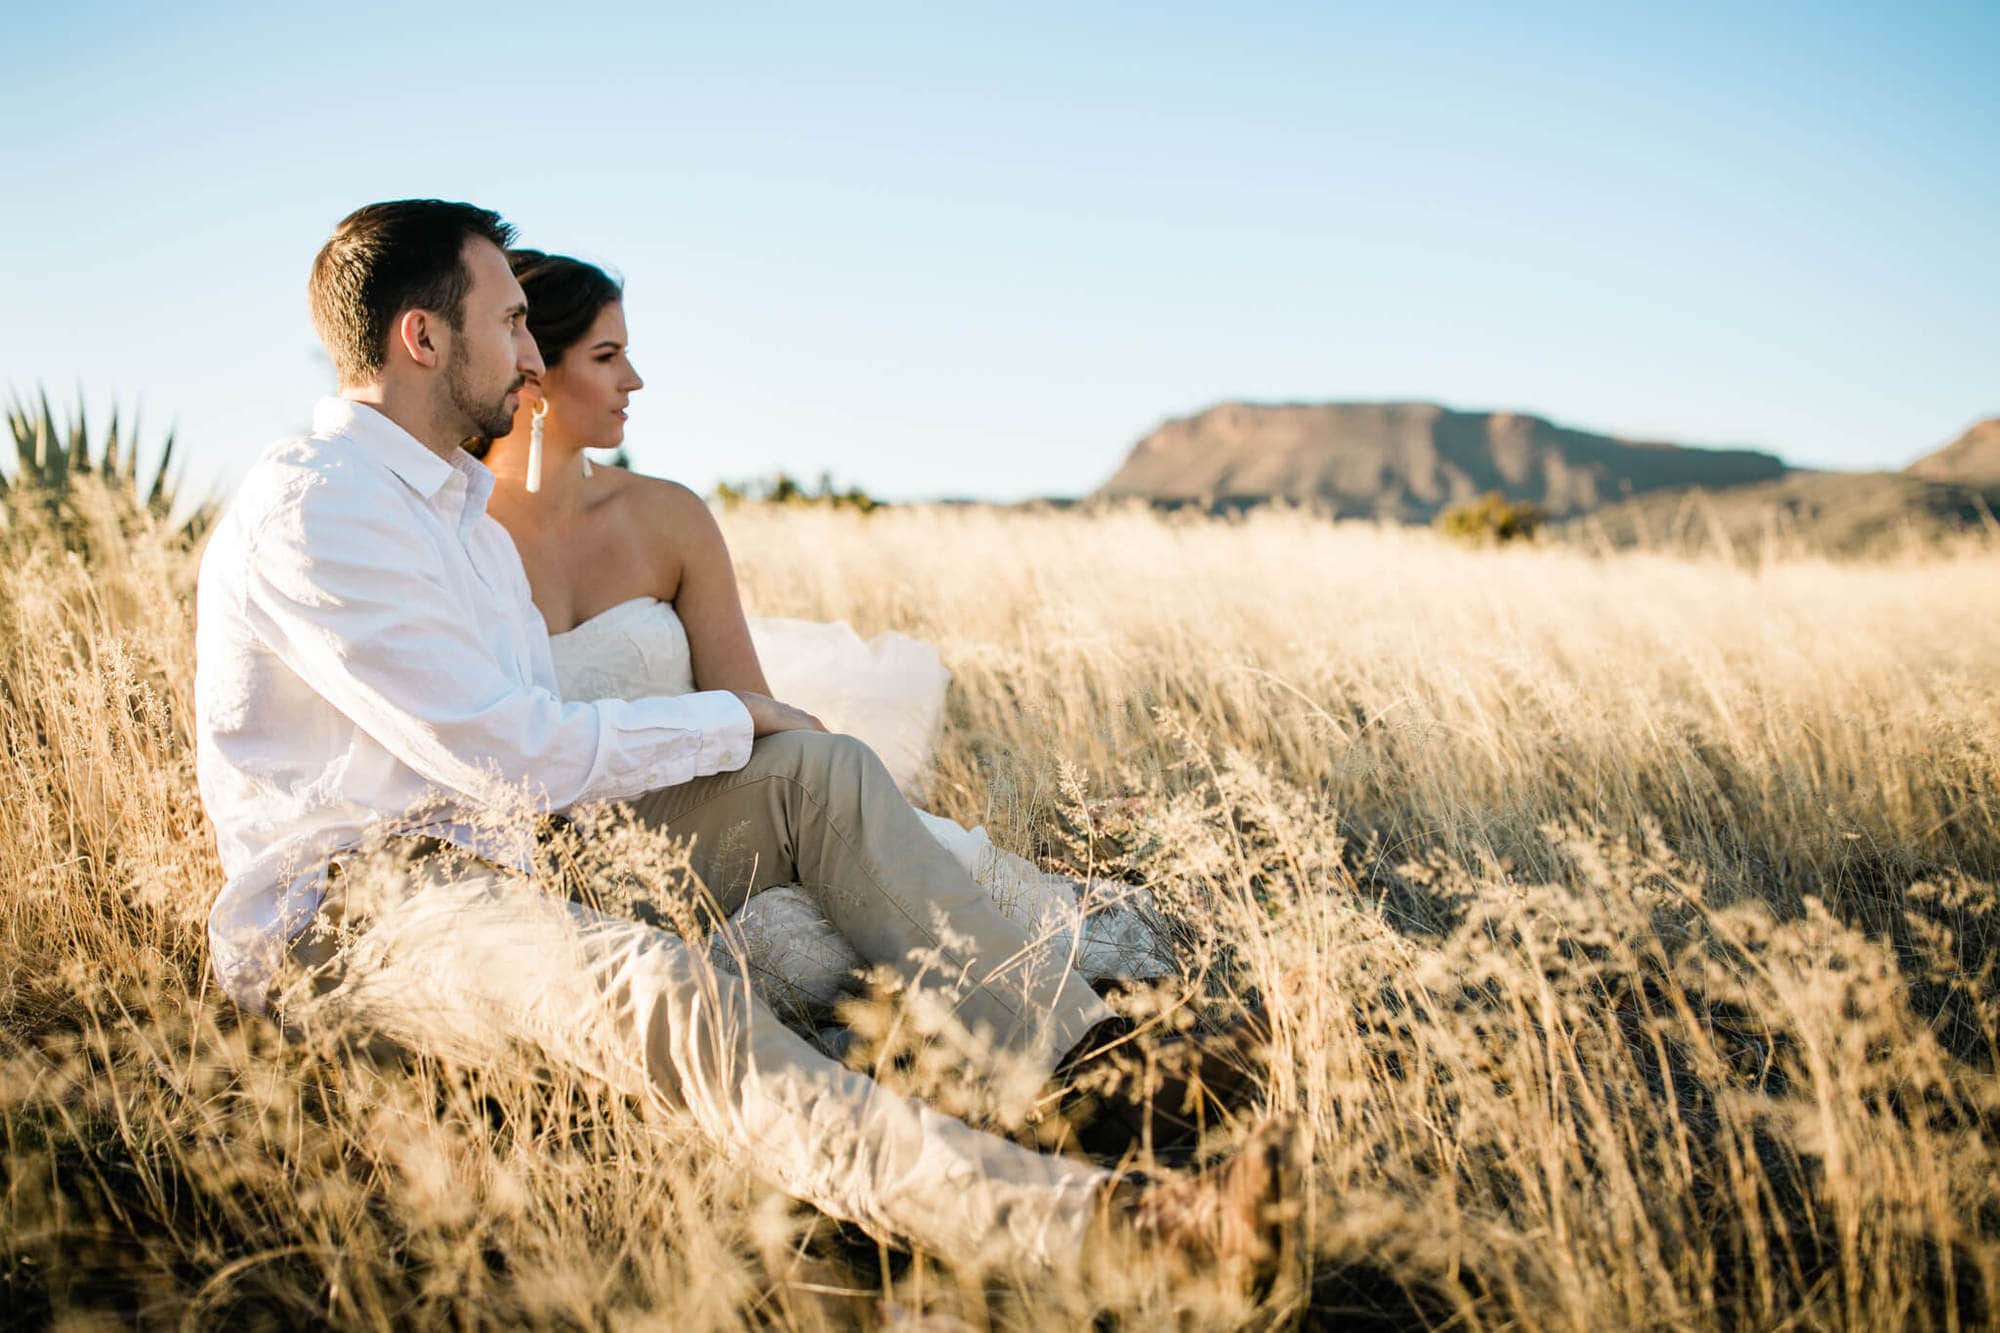 Sitting in a field of dried grass, the bride and groom look out into the field. 